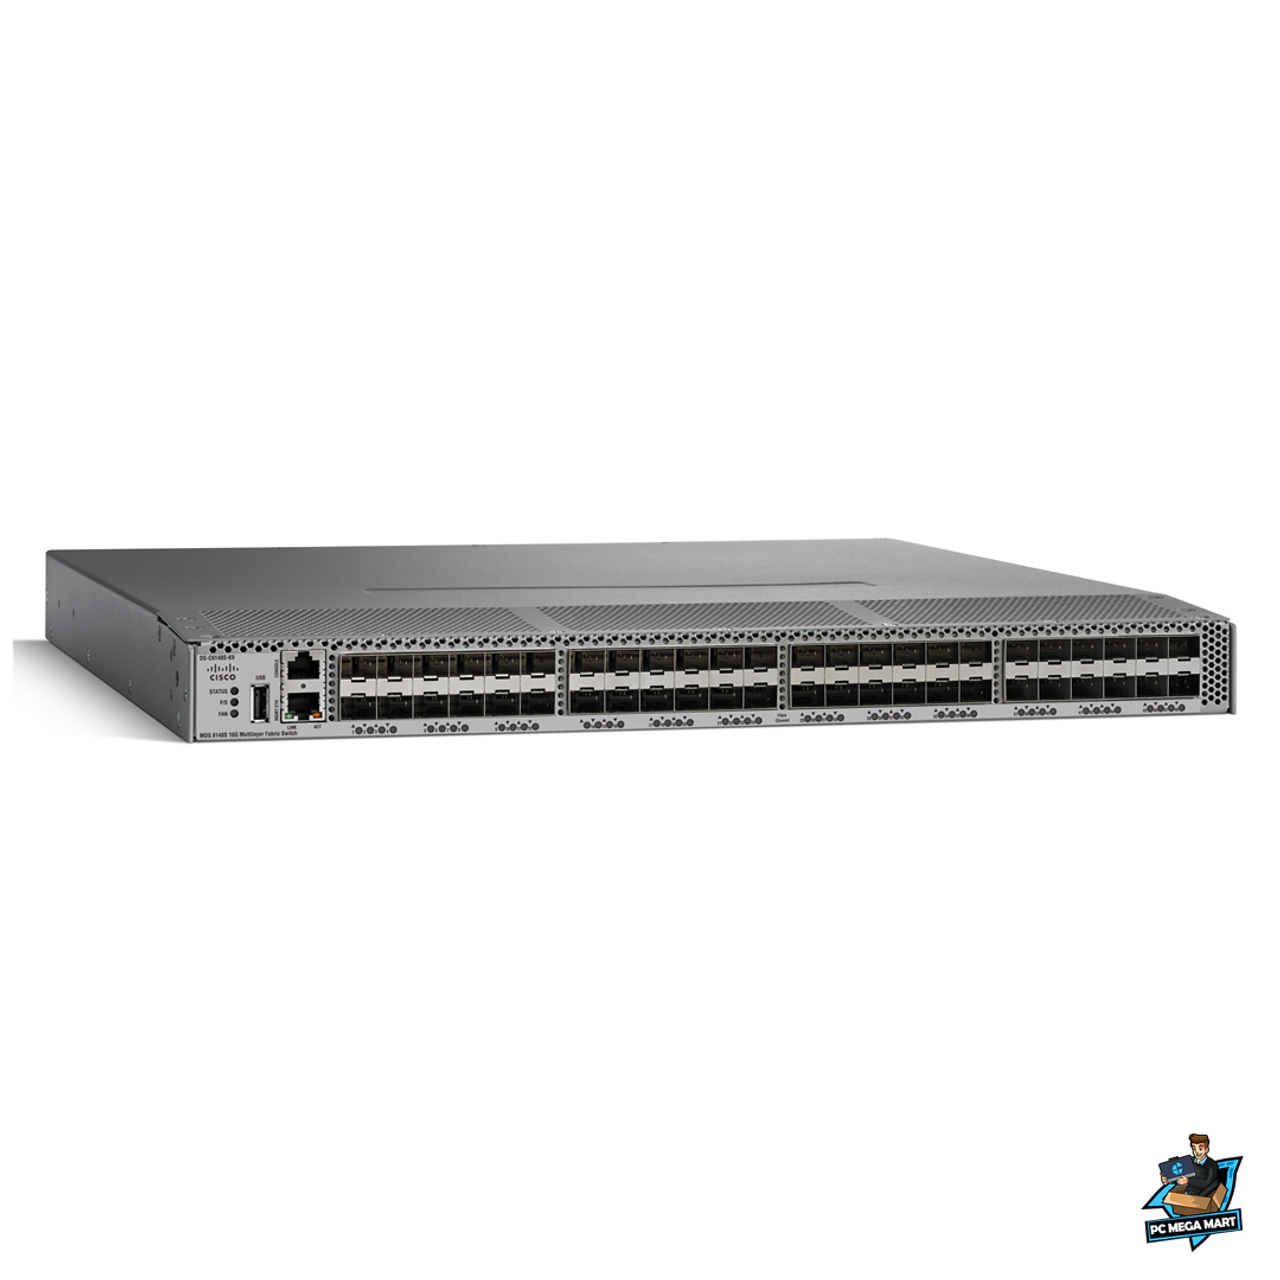 K2Q16A - HPE StoreFabric SN6010C 12-port 16Gb Fibre Channel Switch - Right facing